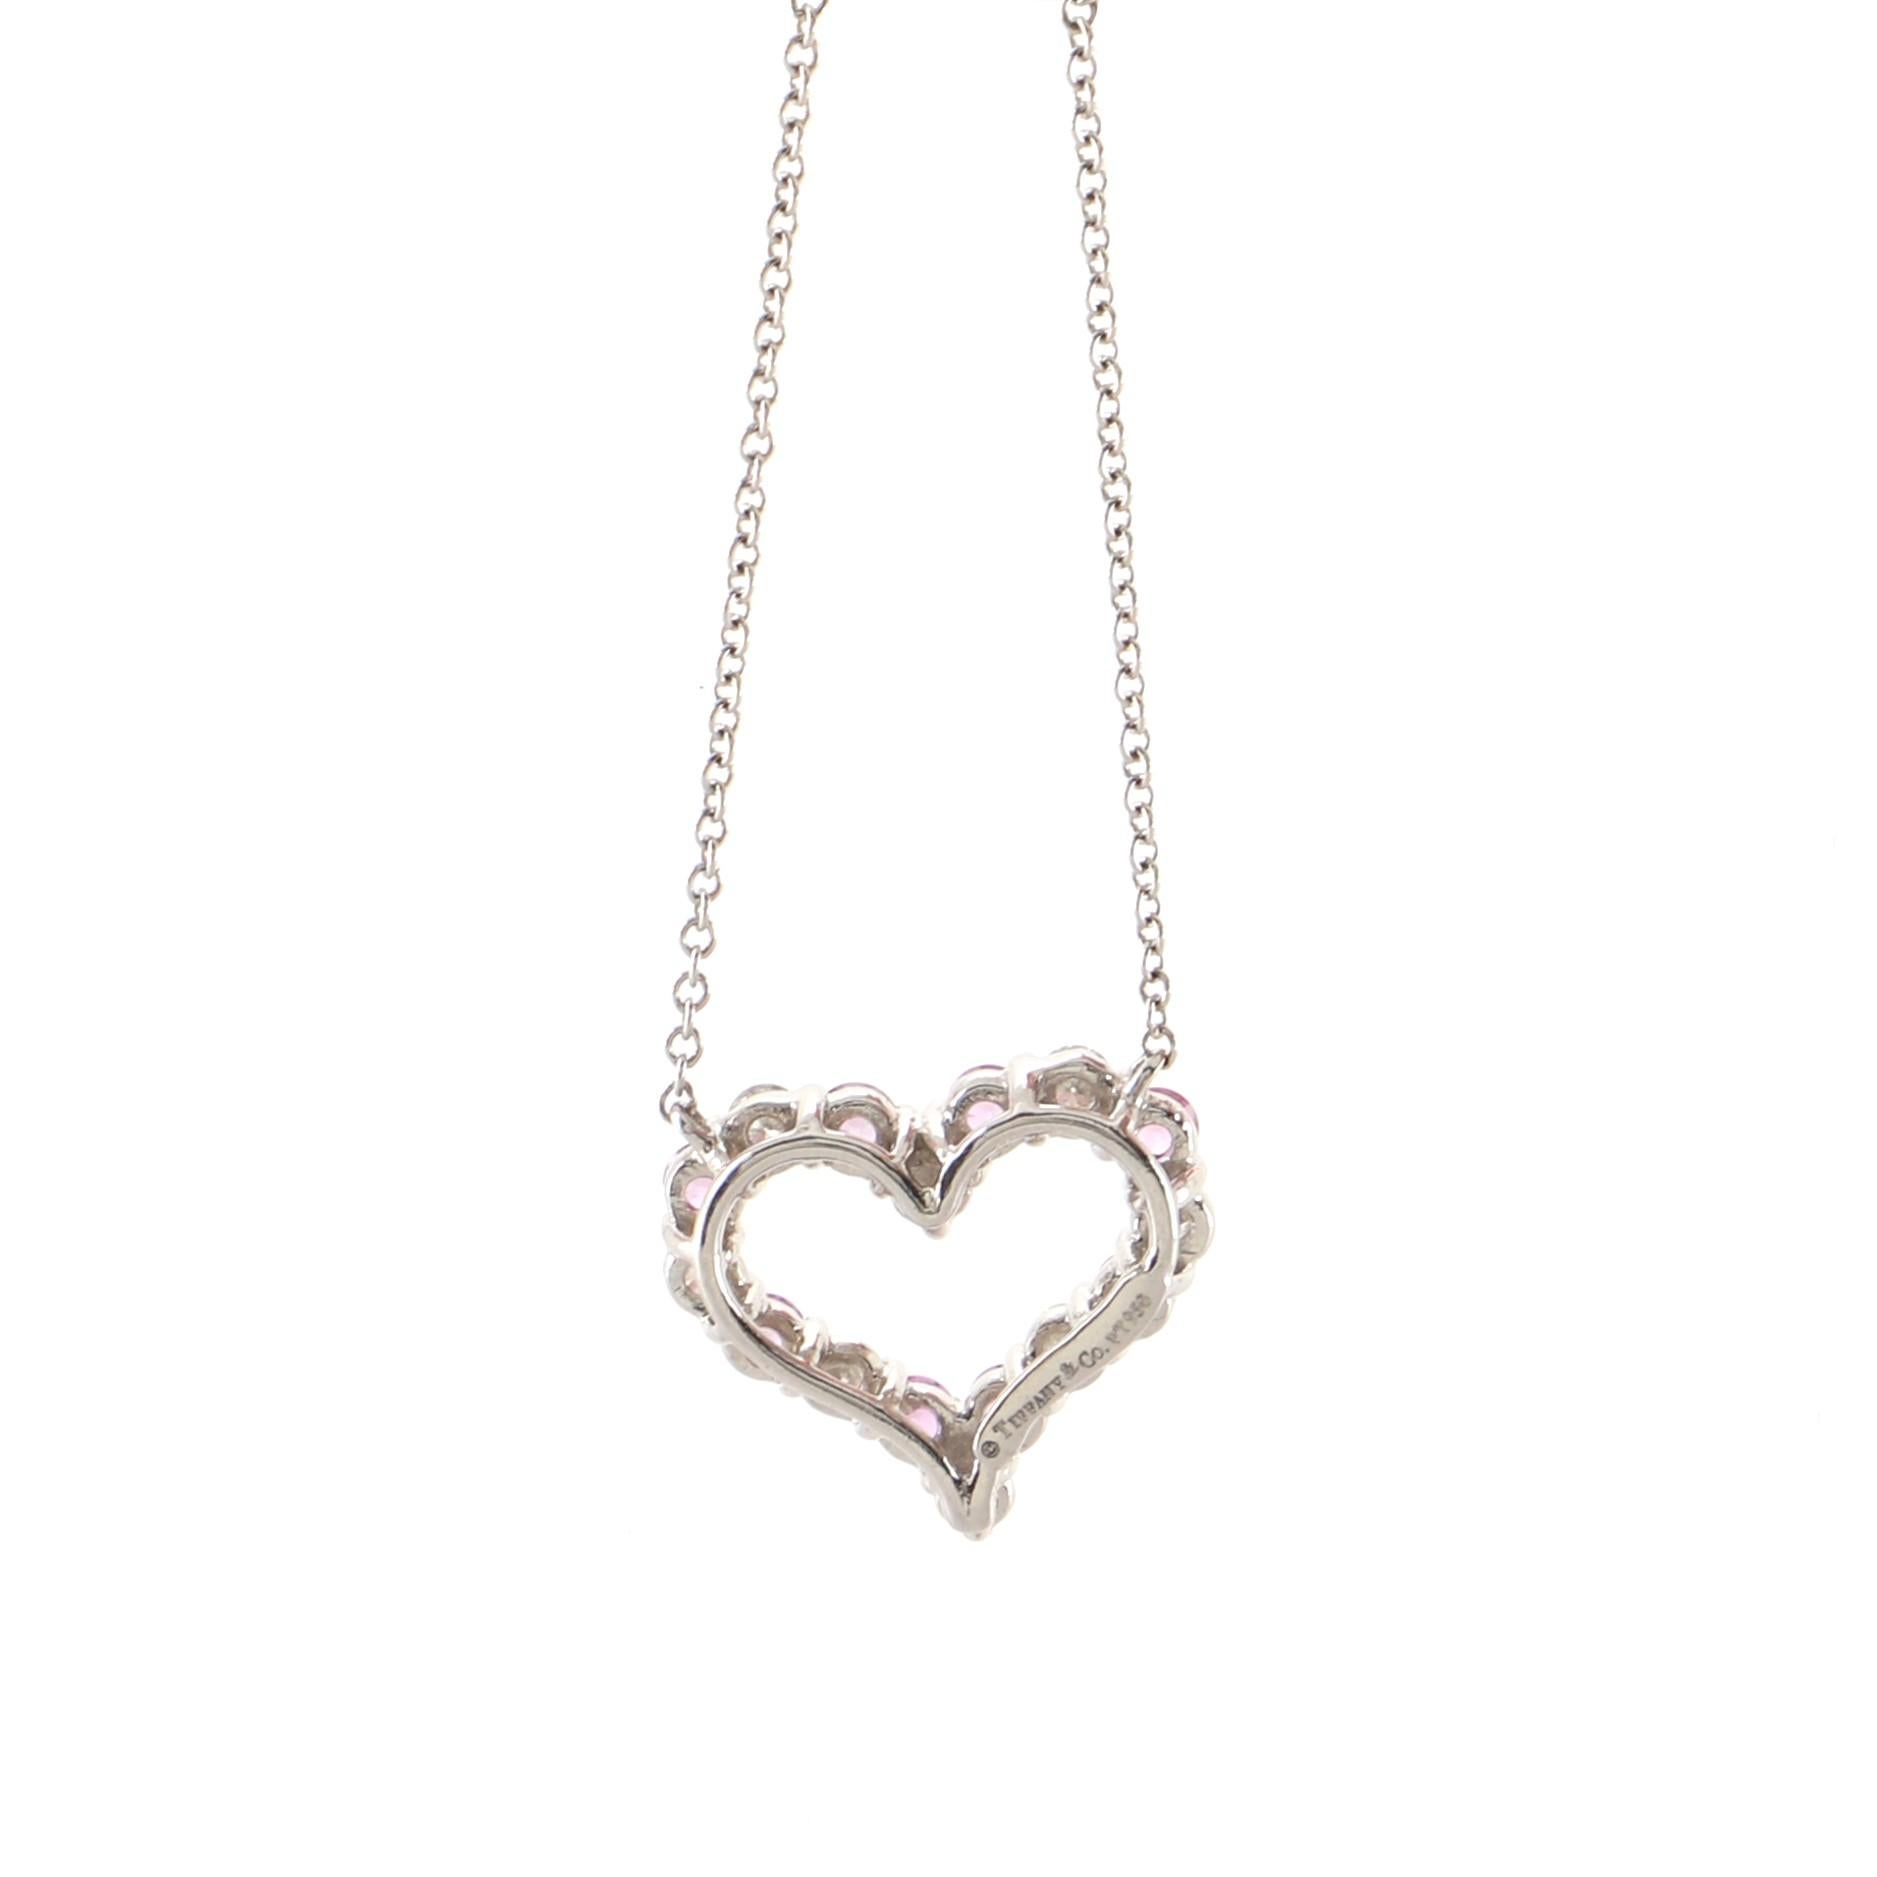 Round Cut Tiffany & Co. Sentimental Heart Pendant Necklace Platinum with Diamonds and Pink